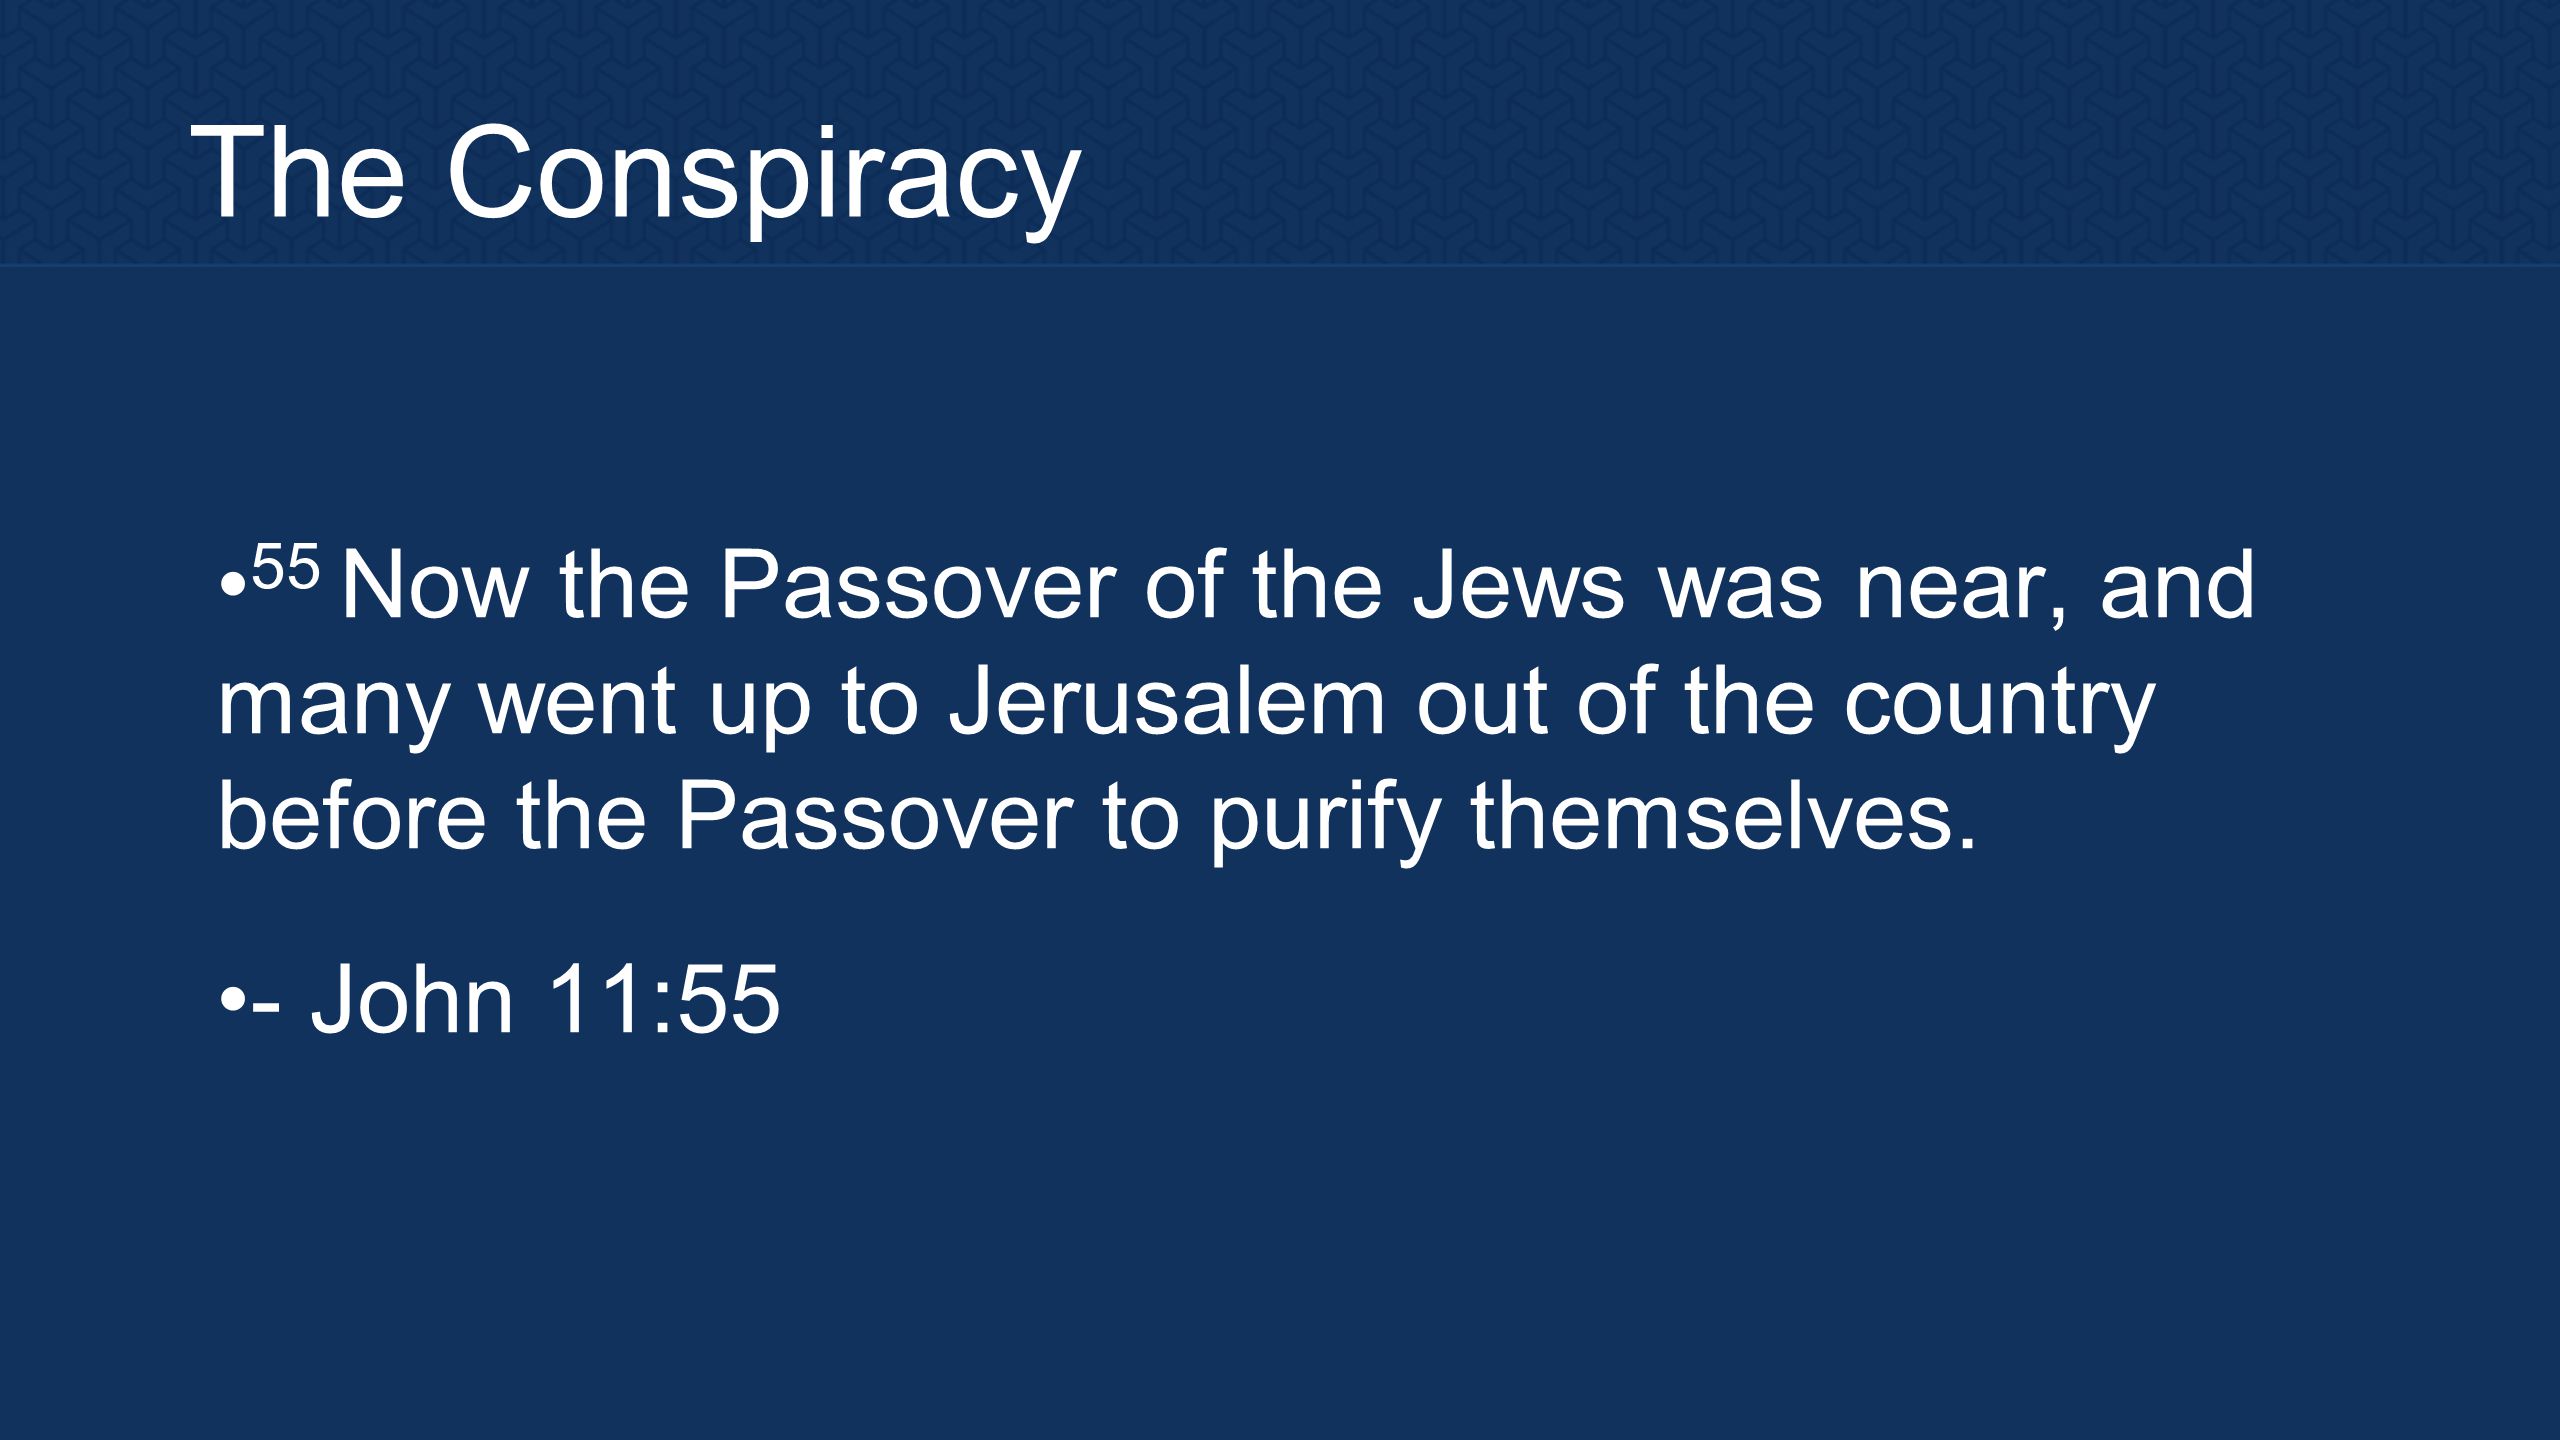 The Conspiracy 55 Now the Passover of the Jews was near, and many went up to Jerusalem out of the country before the Passover to purify themselves.